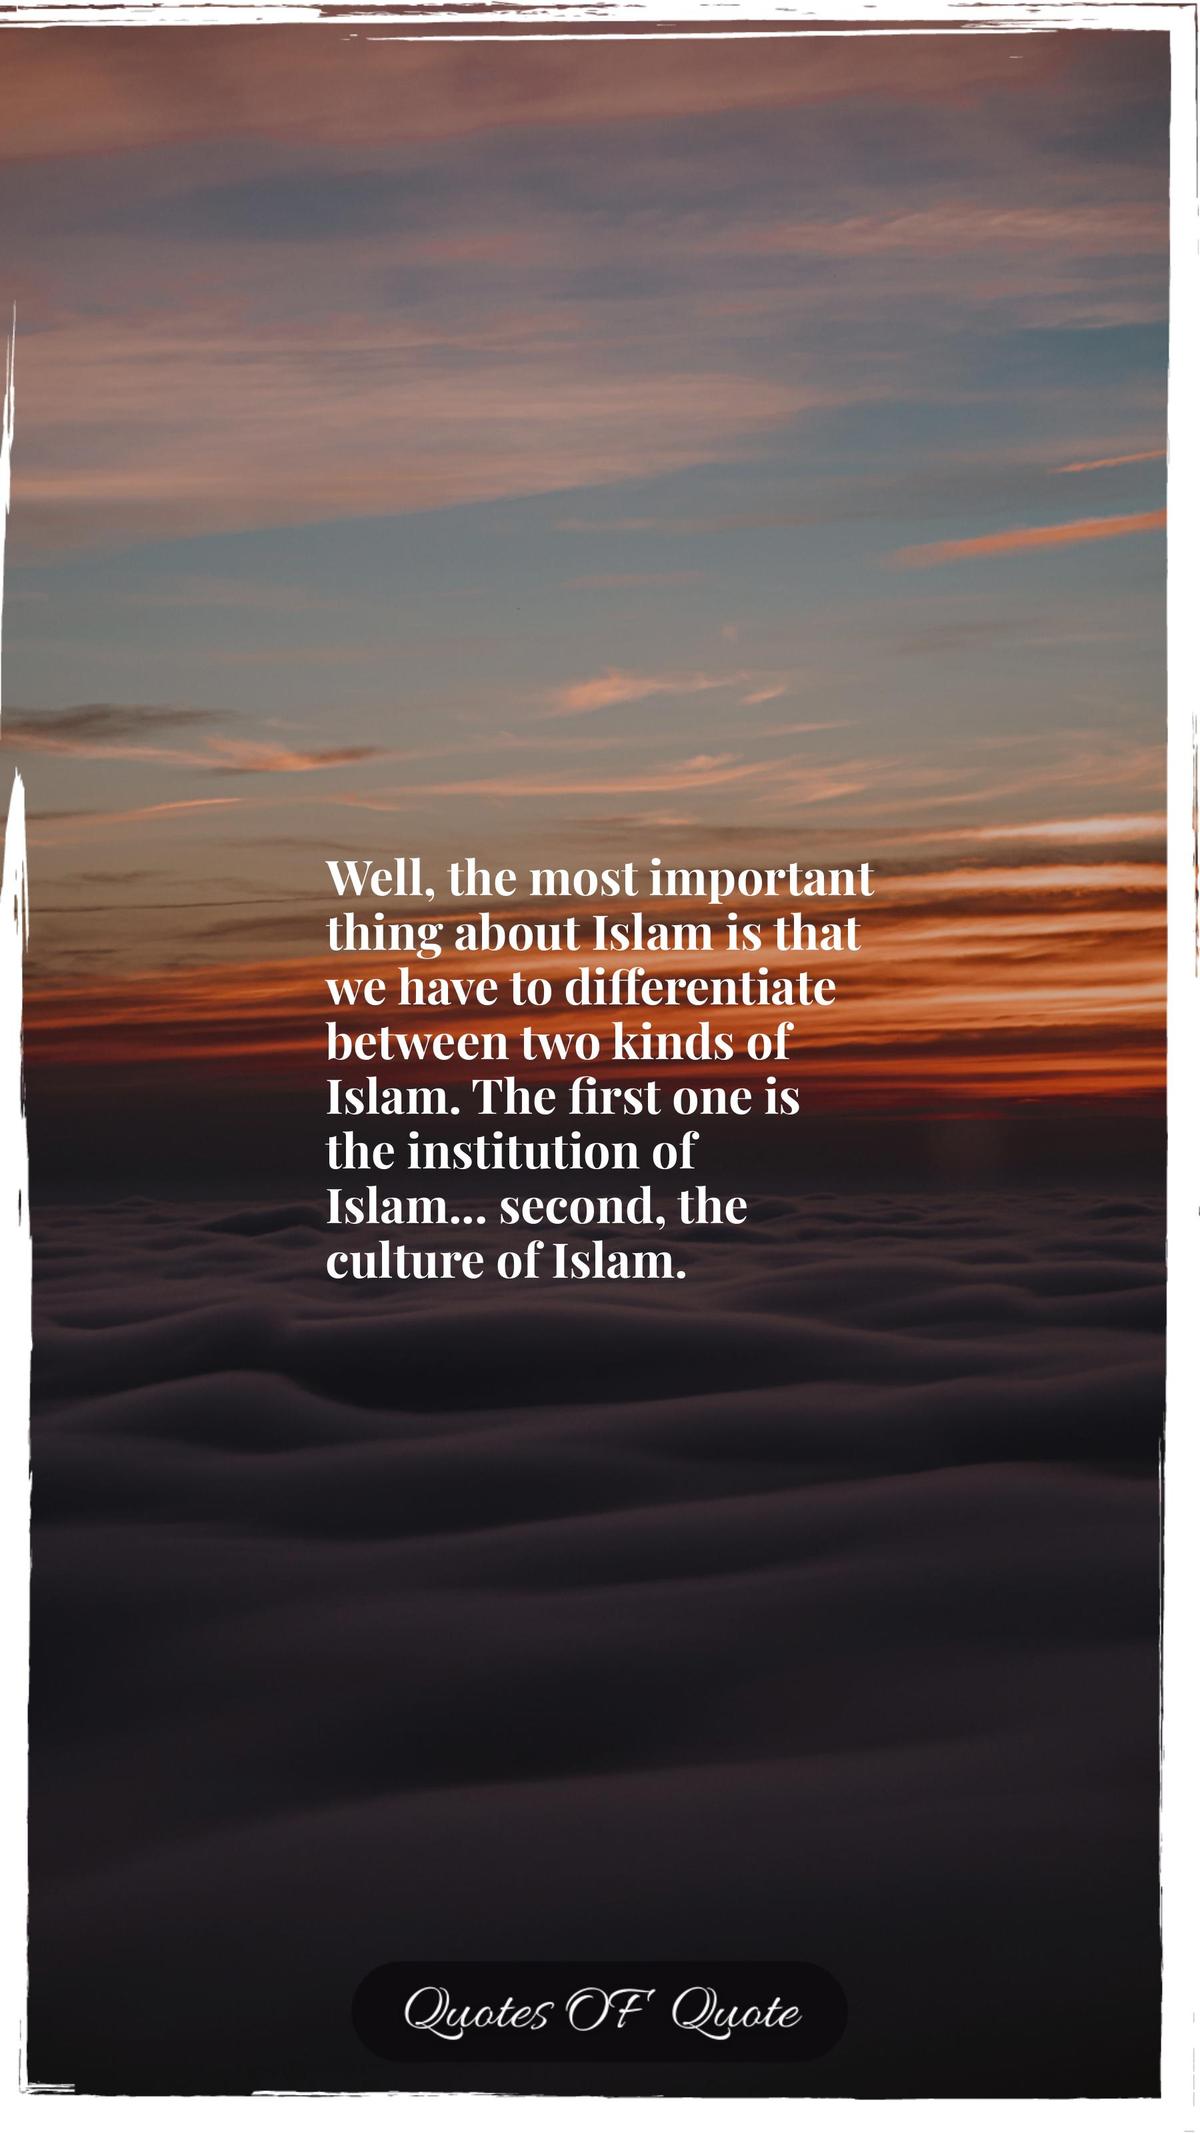 Well, the most important thing about Islam is that we have to differentiate between two kinds of Islam. The first one is the institution of Islam... second, the culture of Islam.